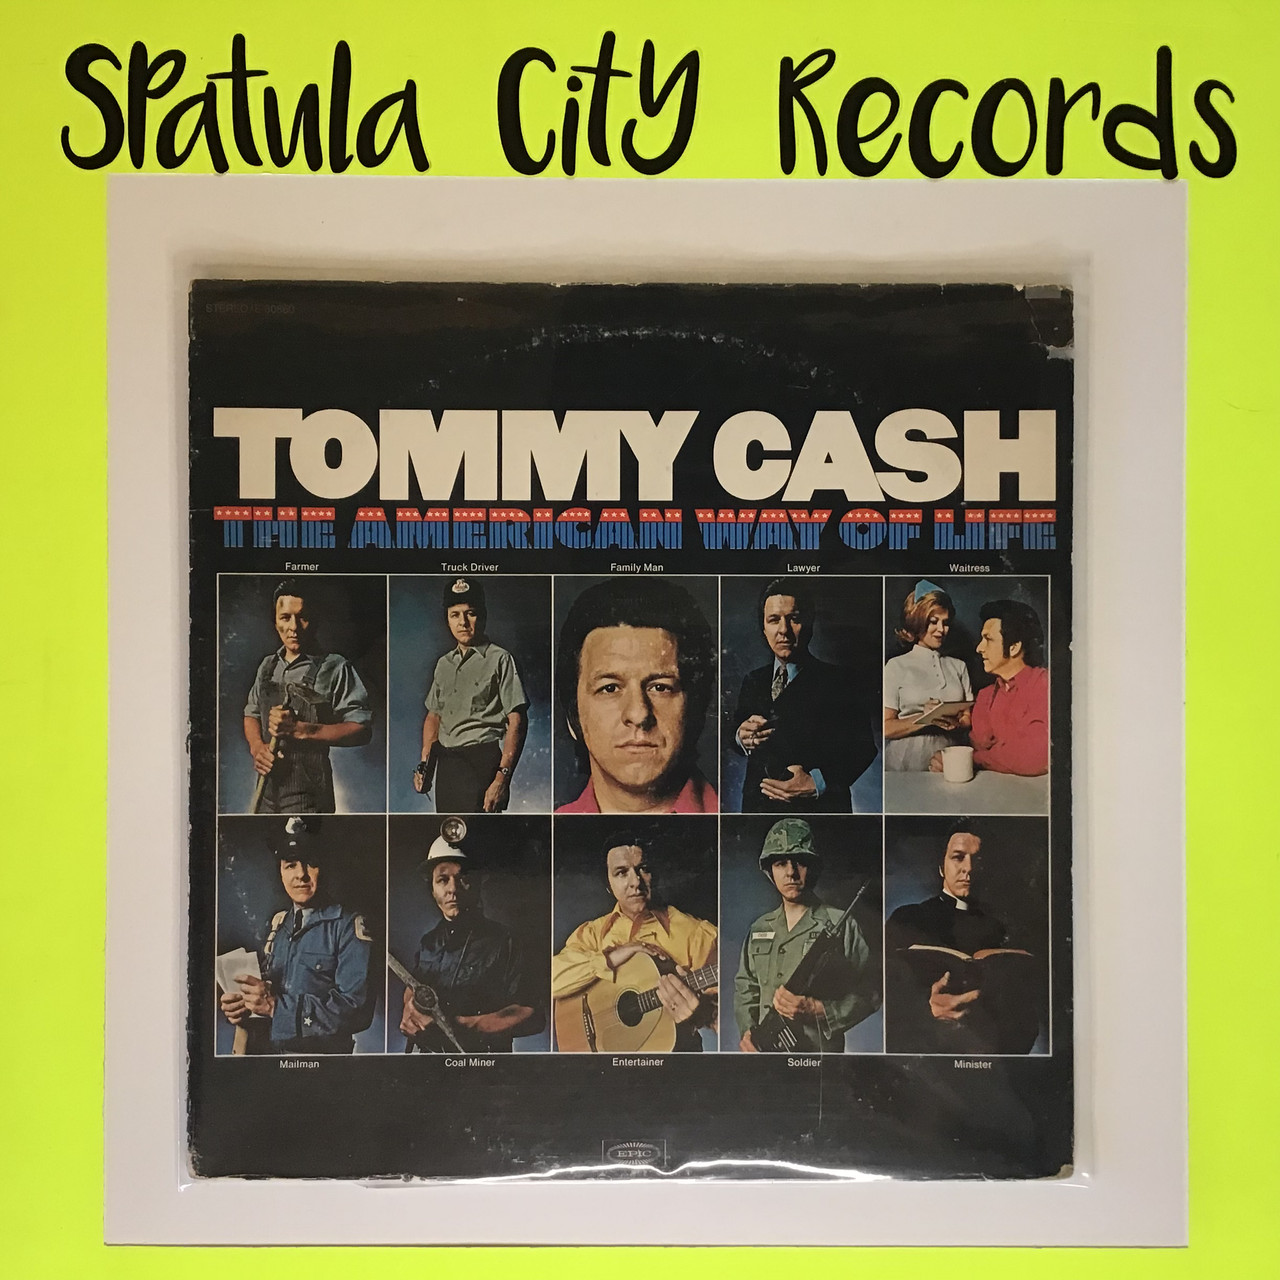 Tommy Cash - The American Way of Life - vinyl record LP